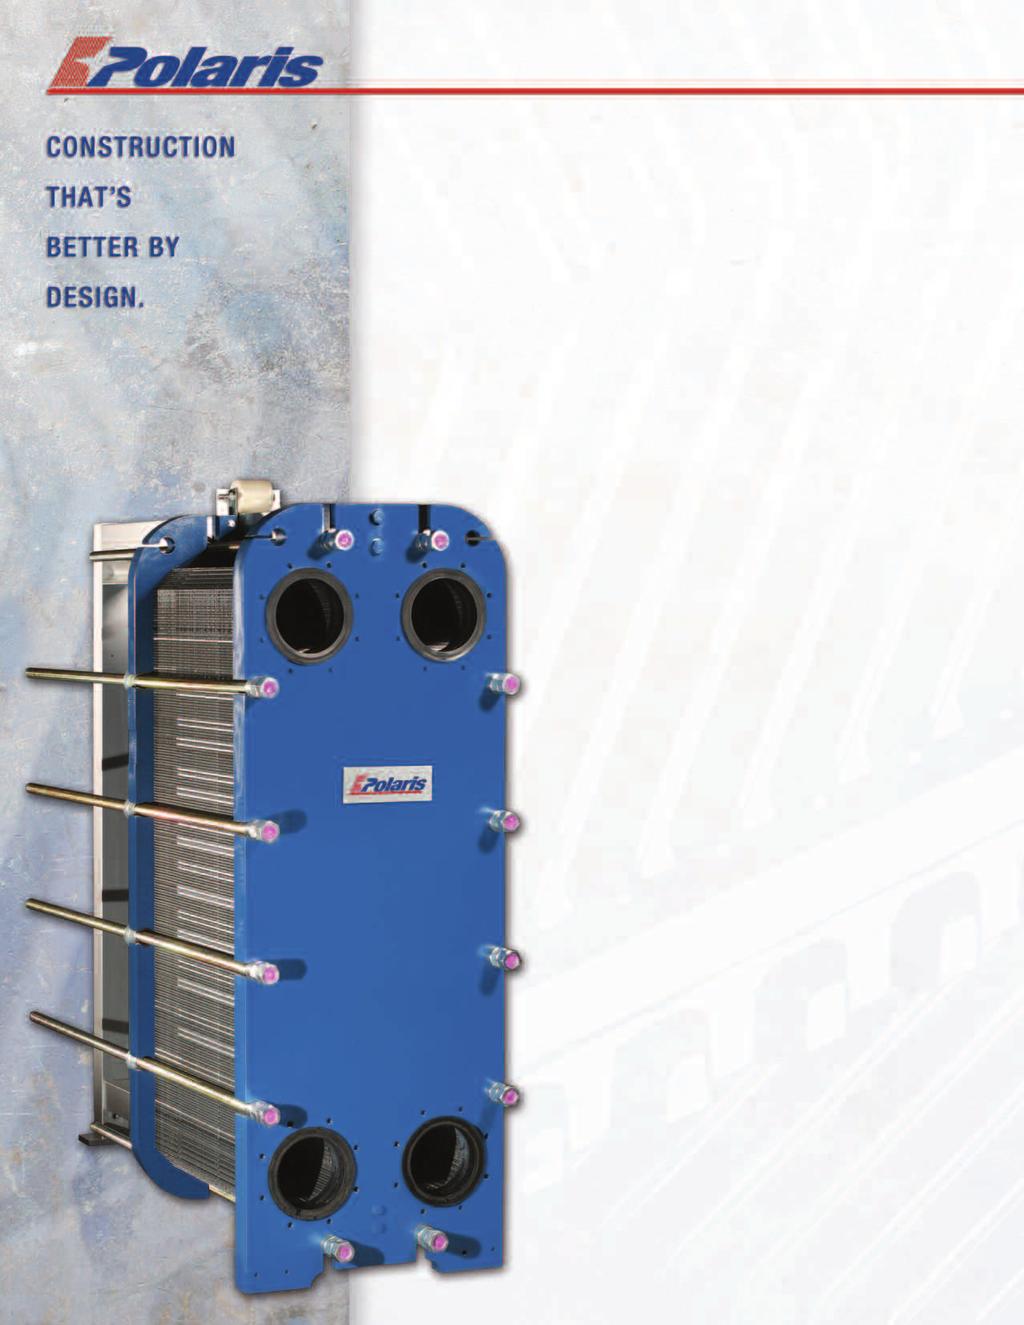 Polaris quality demands careful attention to the materials and craftsmanship in every heat exchanger we make.